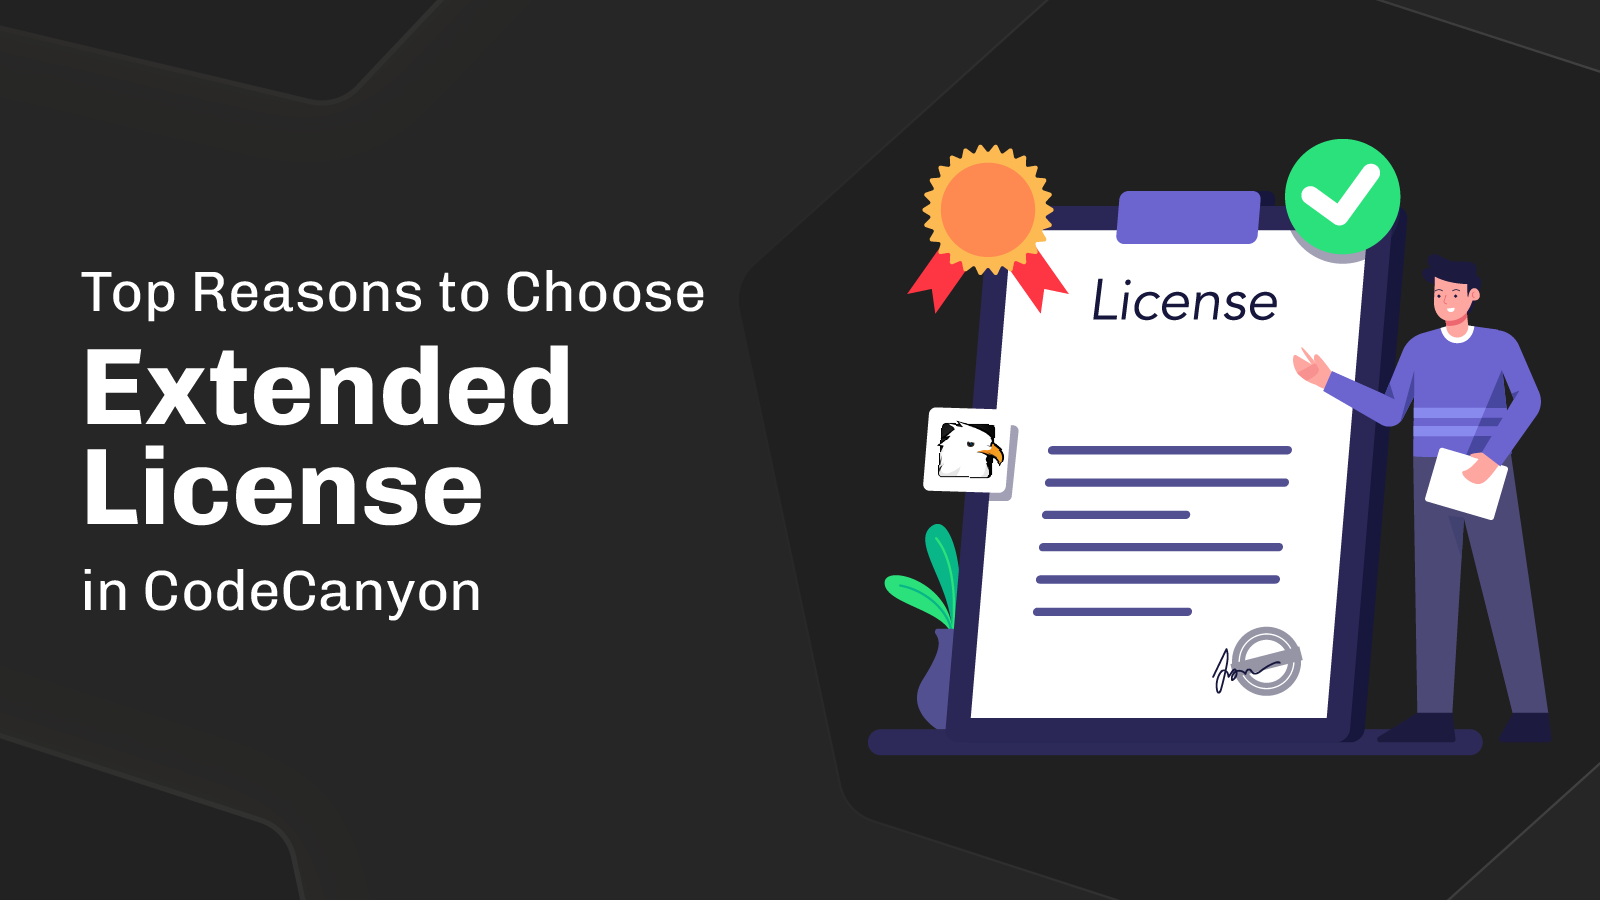 Top Reasons to Choose Extended License in CodeCanyon